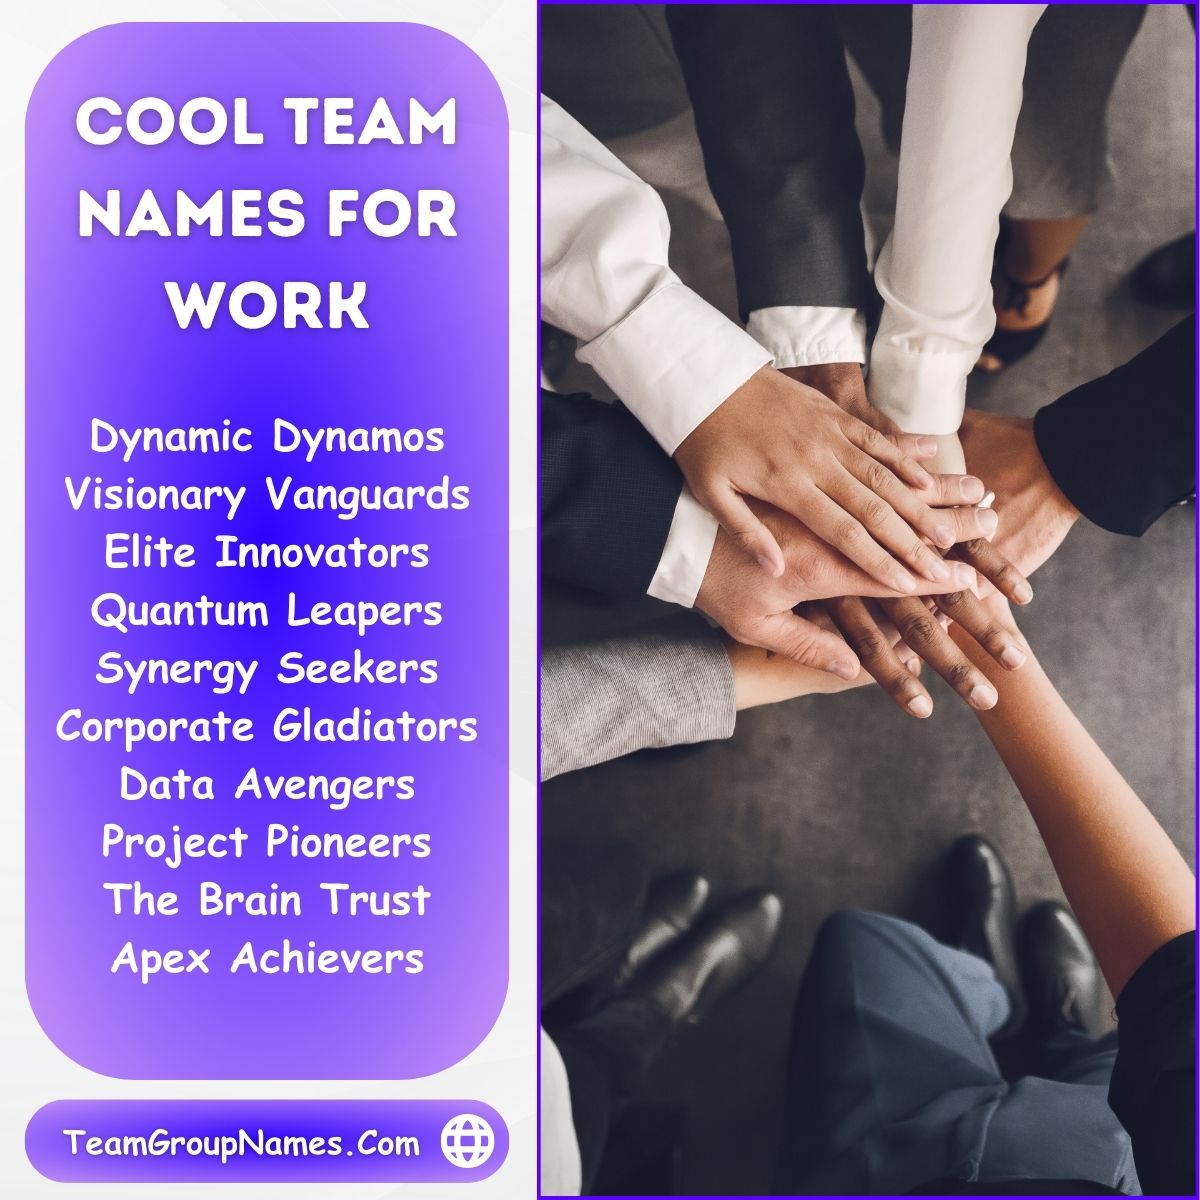 Cool Team Names For Work